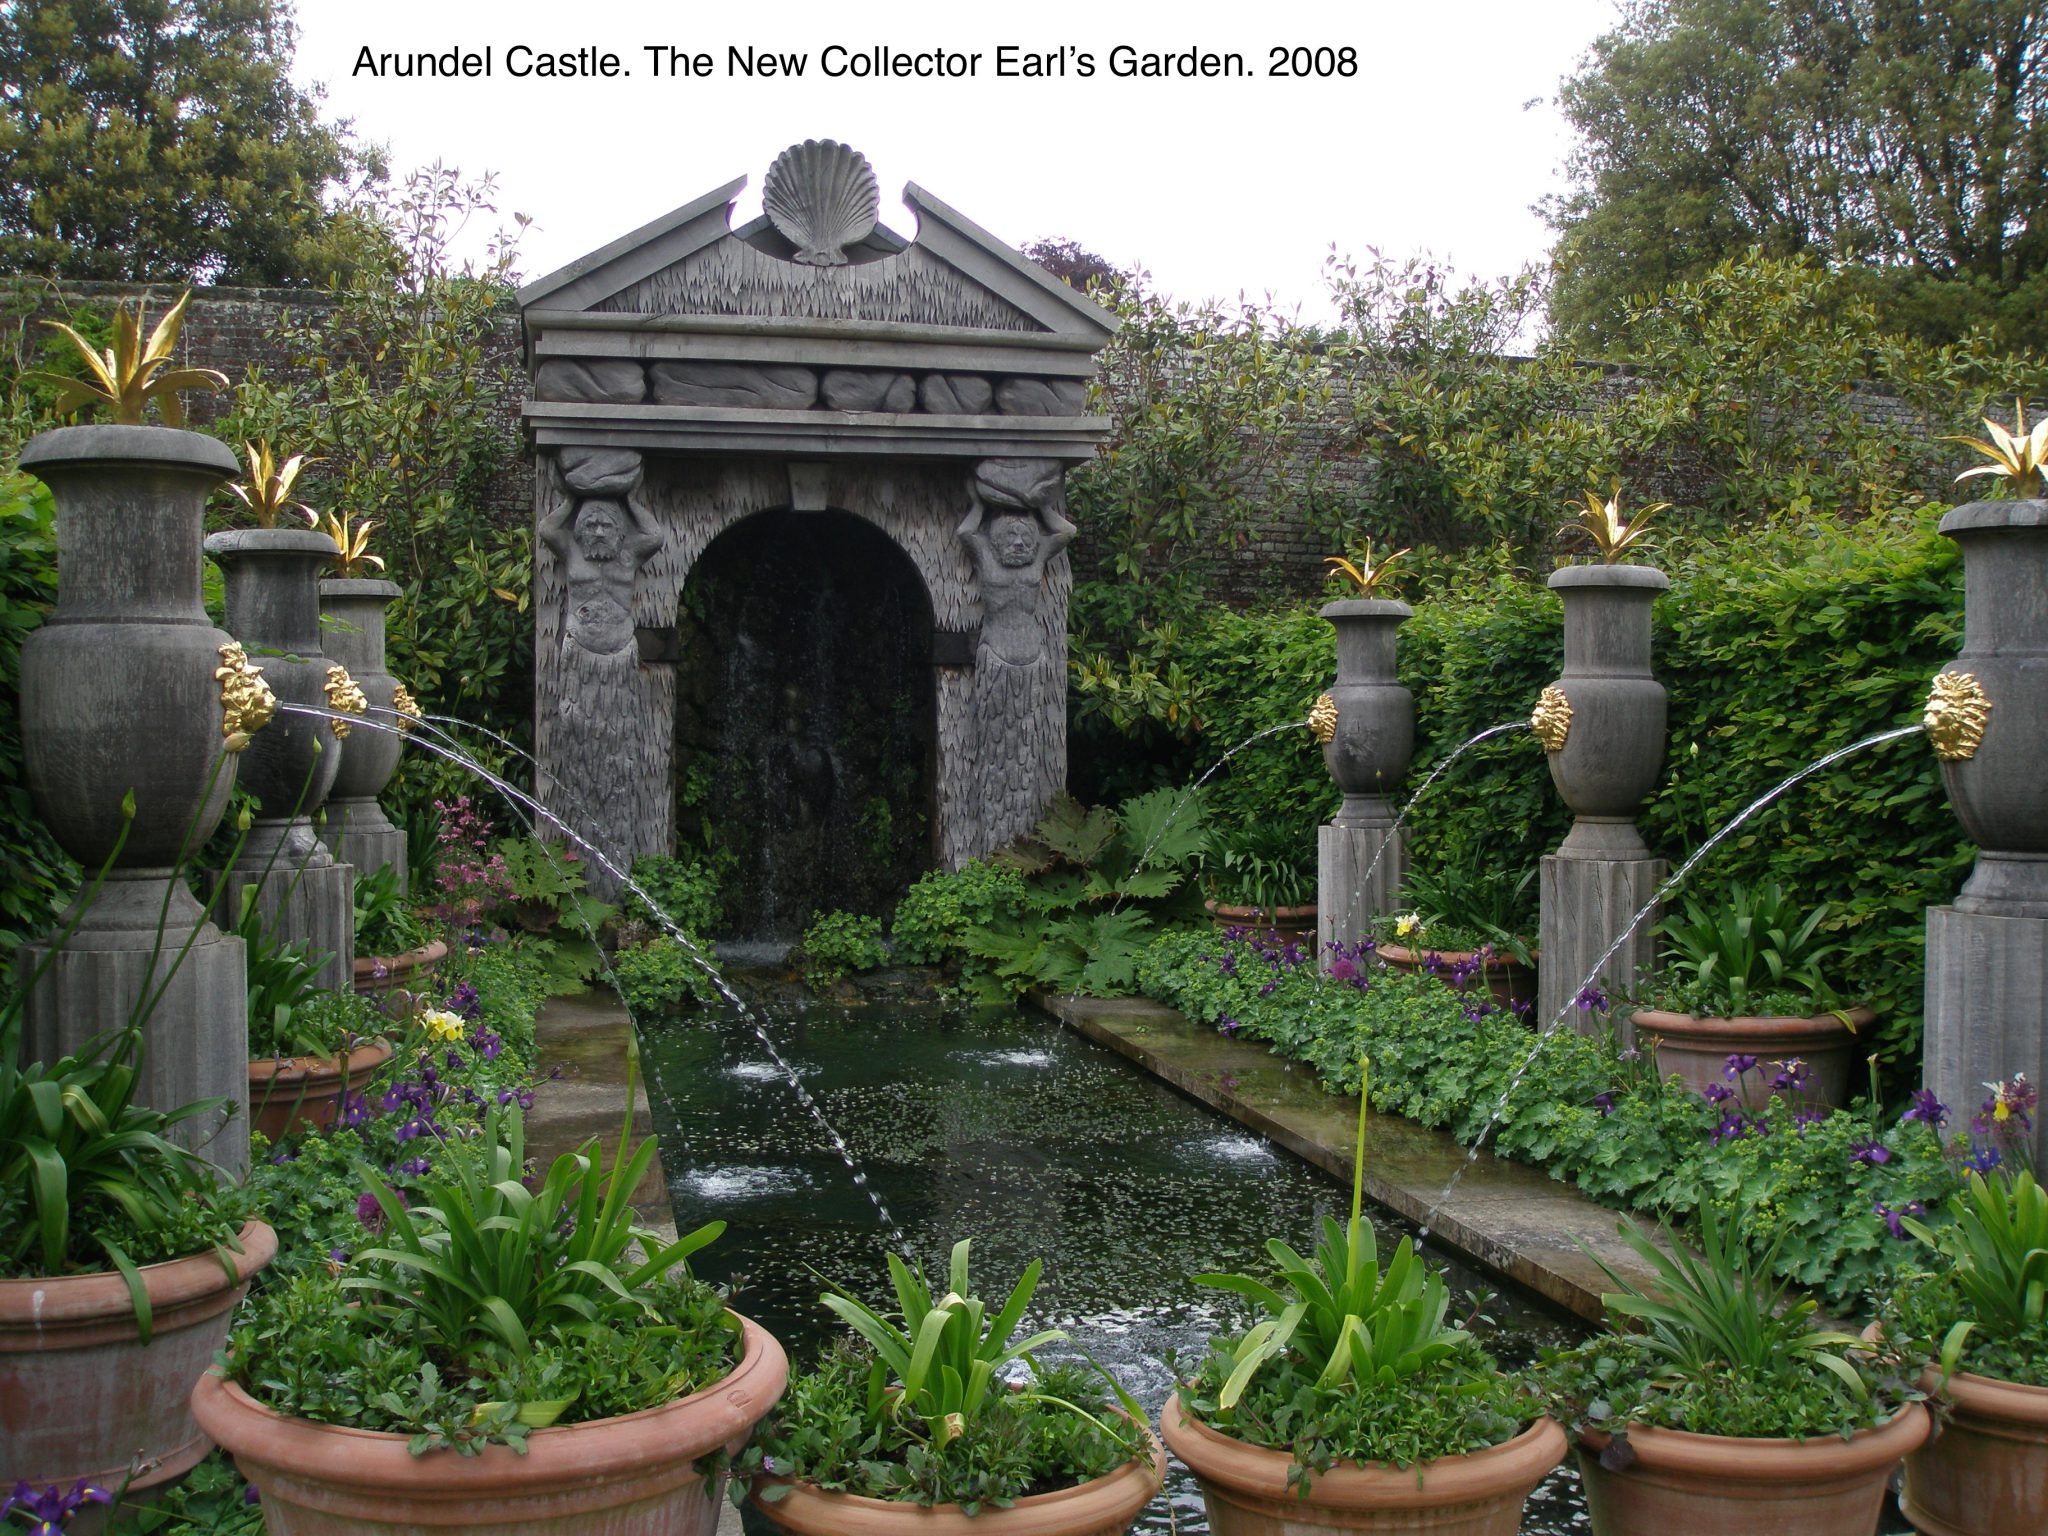 All of the sections of the New Collector Earl's Garden were designed by Isabel and Julian Bannerman. The Bannermans' gardens include ornamental features inspired by the classical garden vocabulary, which are modernized by carvings made of green oak, used in place of stone. When the green oak ages, the wood becomes as unbreakable as rock.